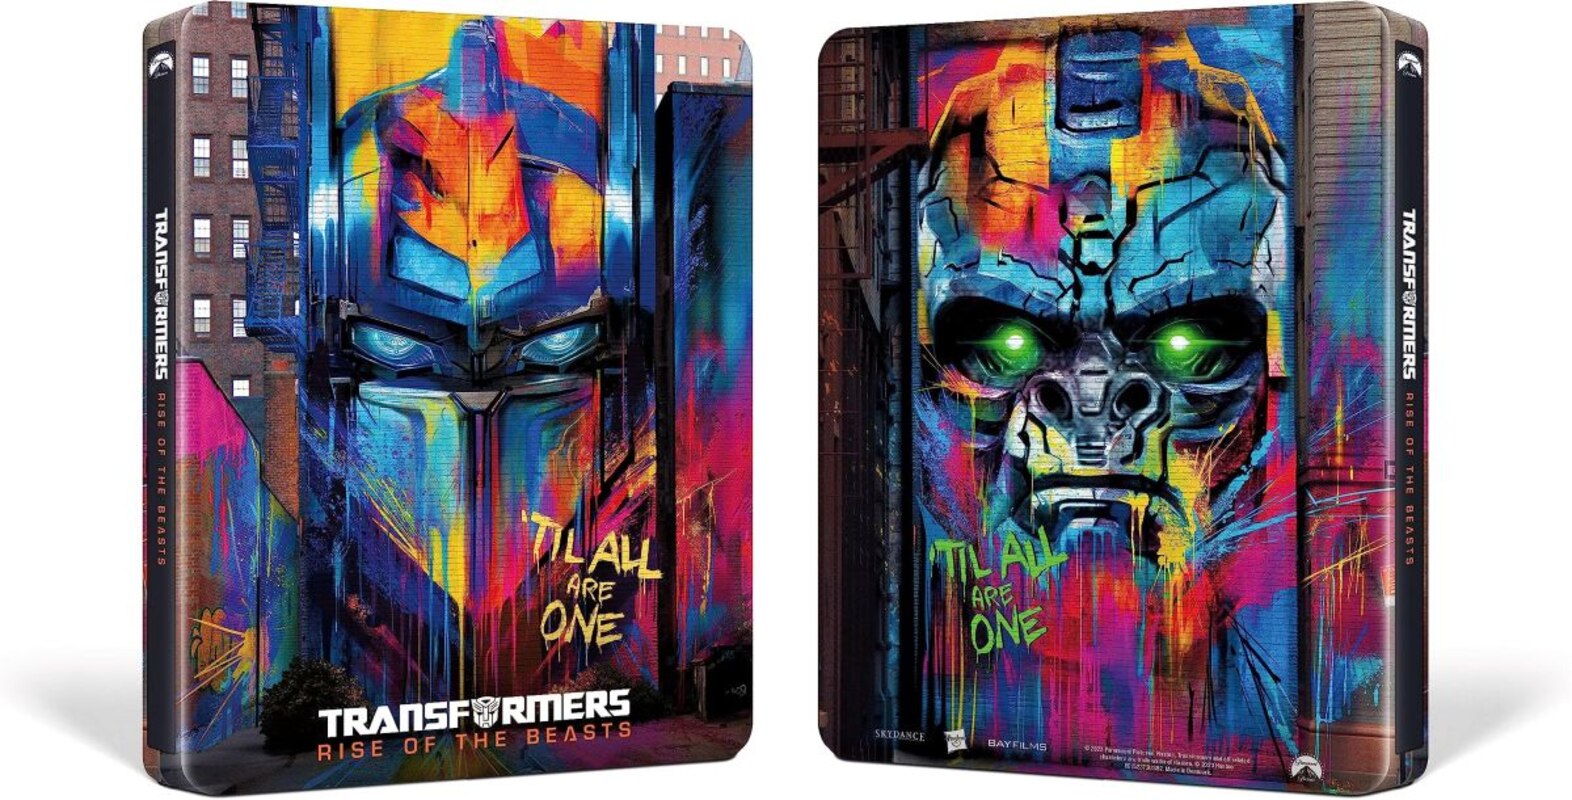 Transformers: Rise of the Beasts Steelbook, 4K UHD, Blu-Ray, DVD USA Preorders Open Now